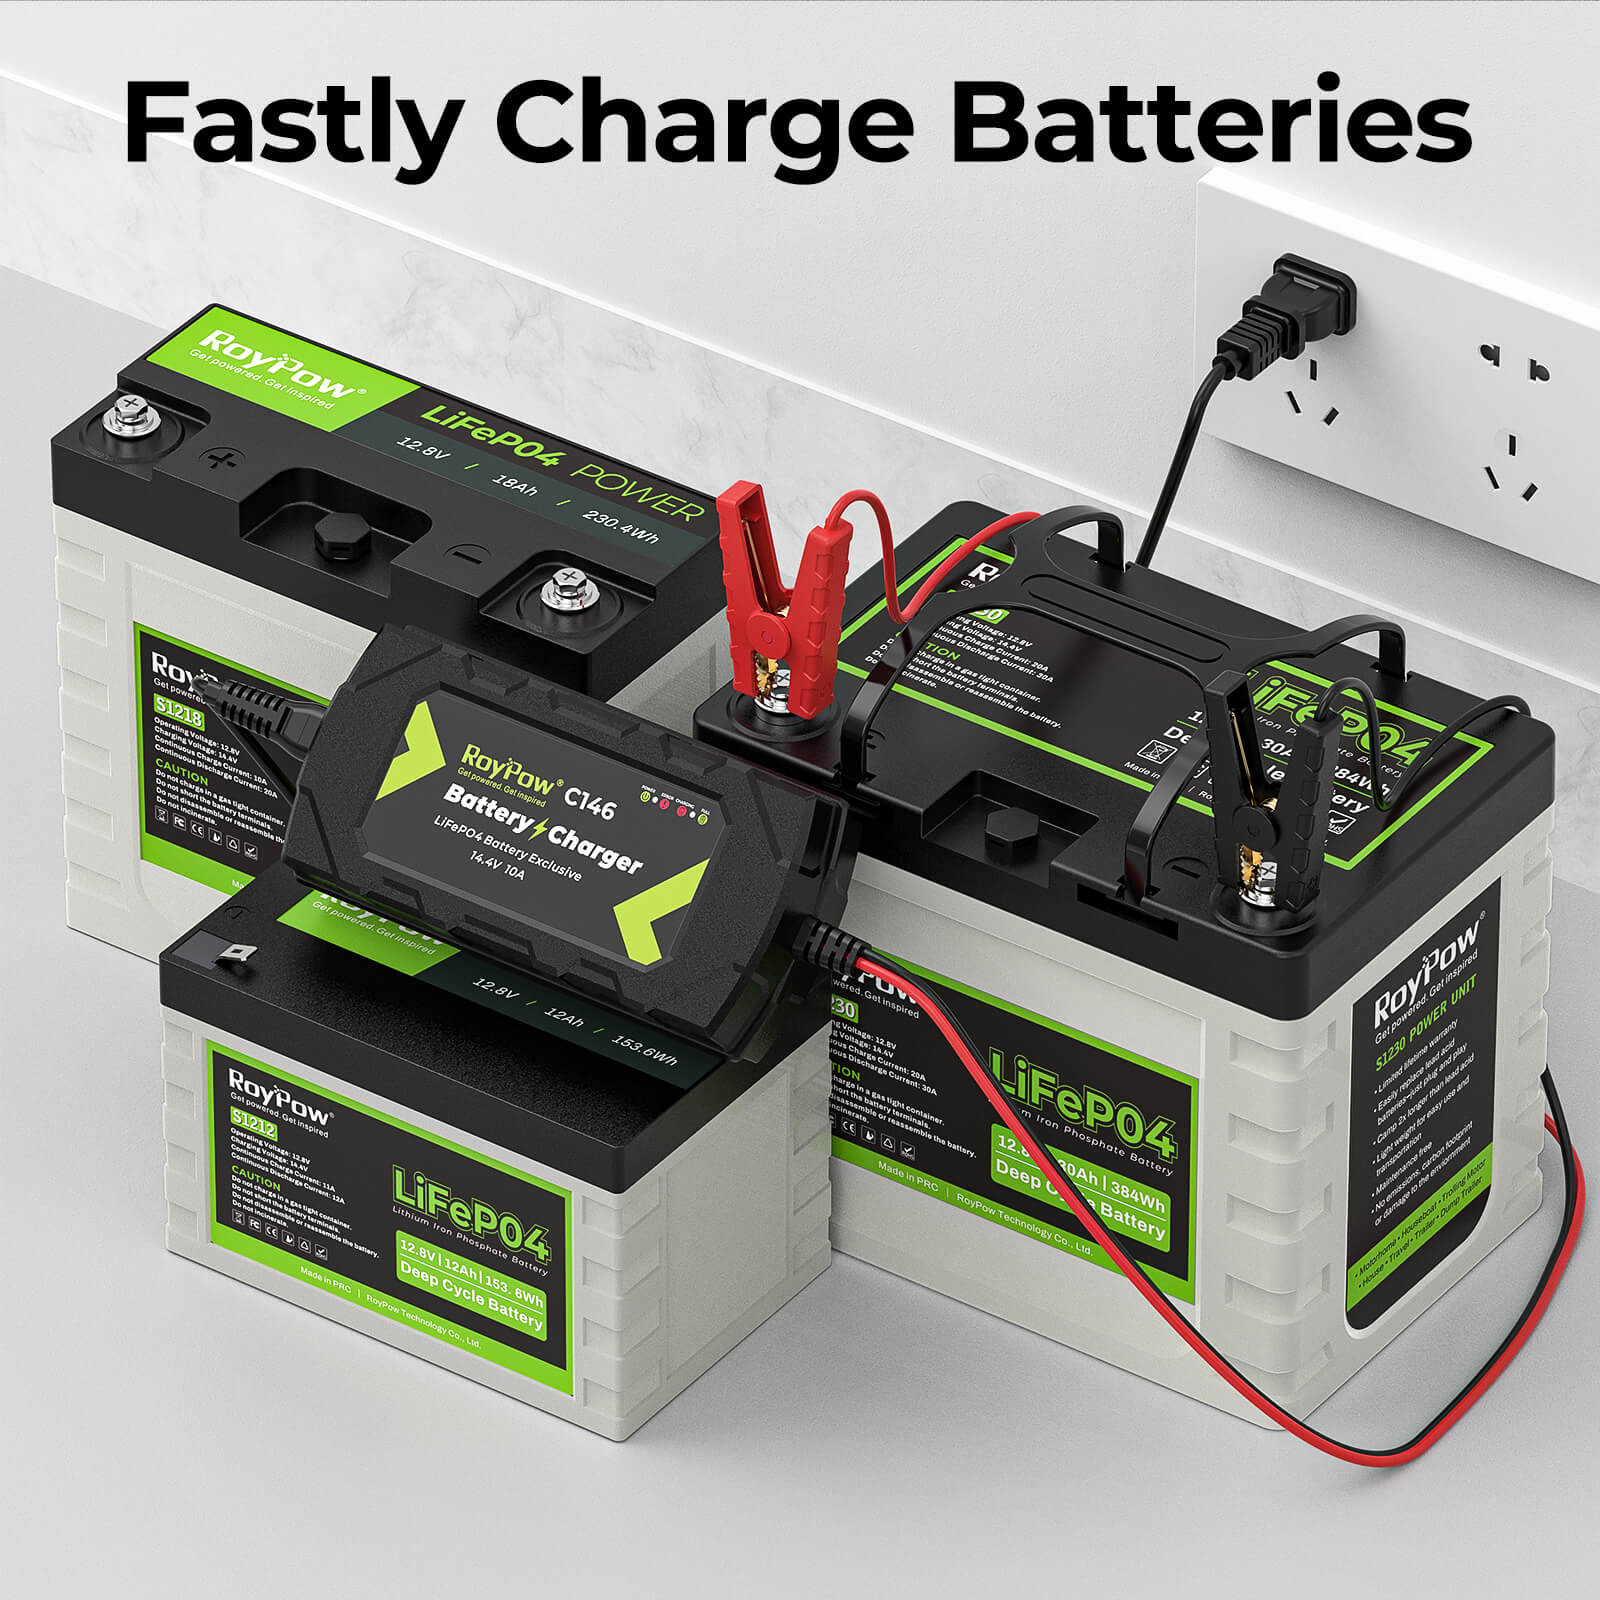 RoyPow 14.4V-10A C146B LiFePO4 Battery charger